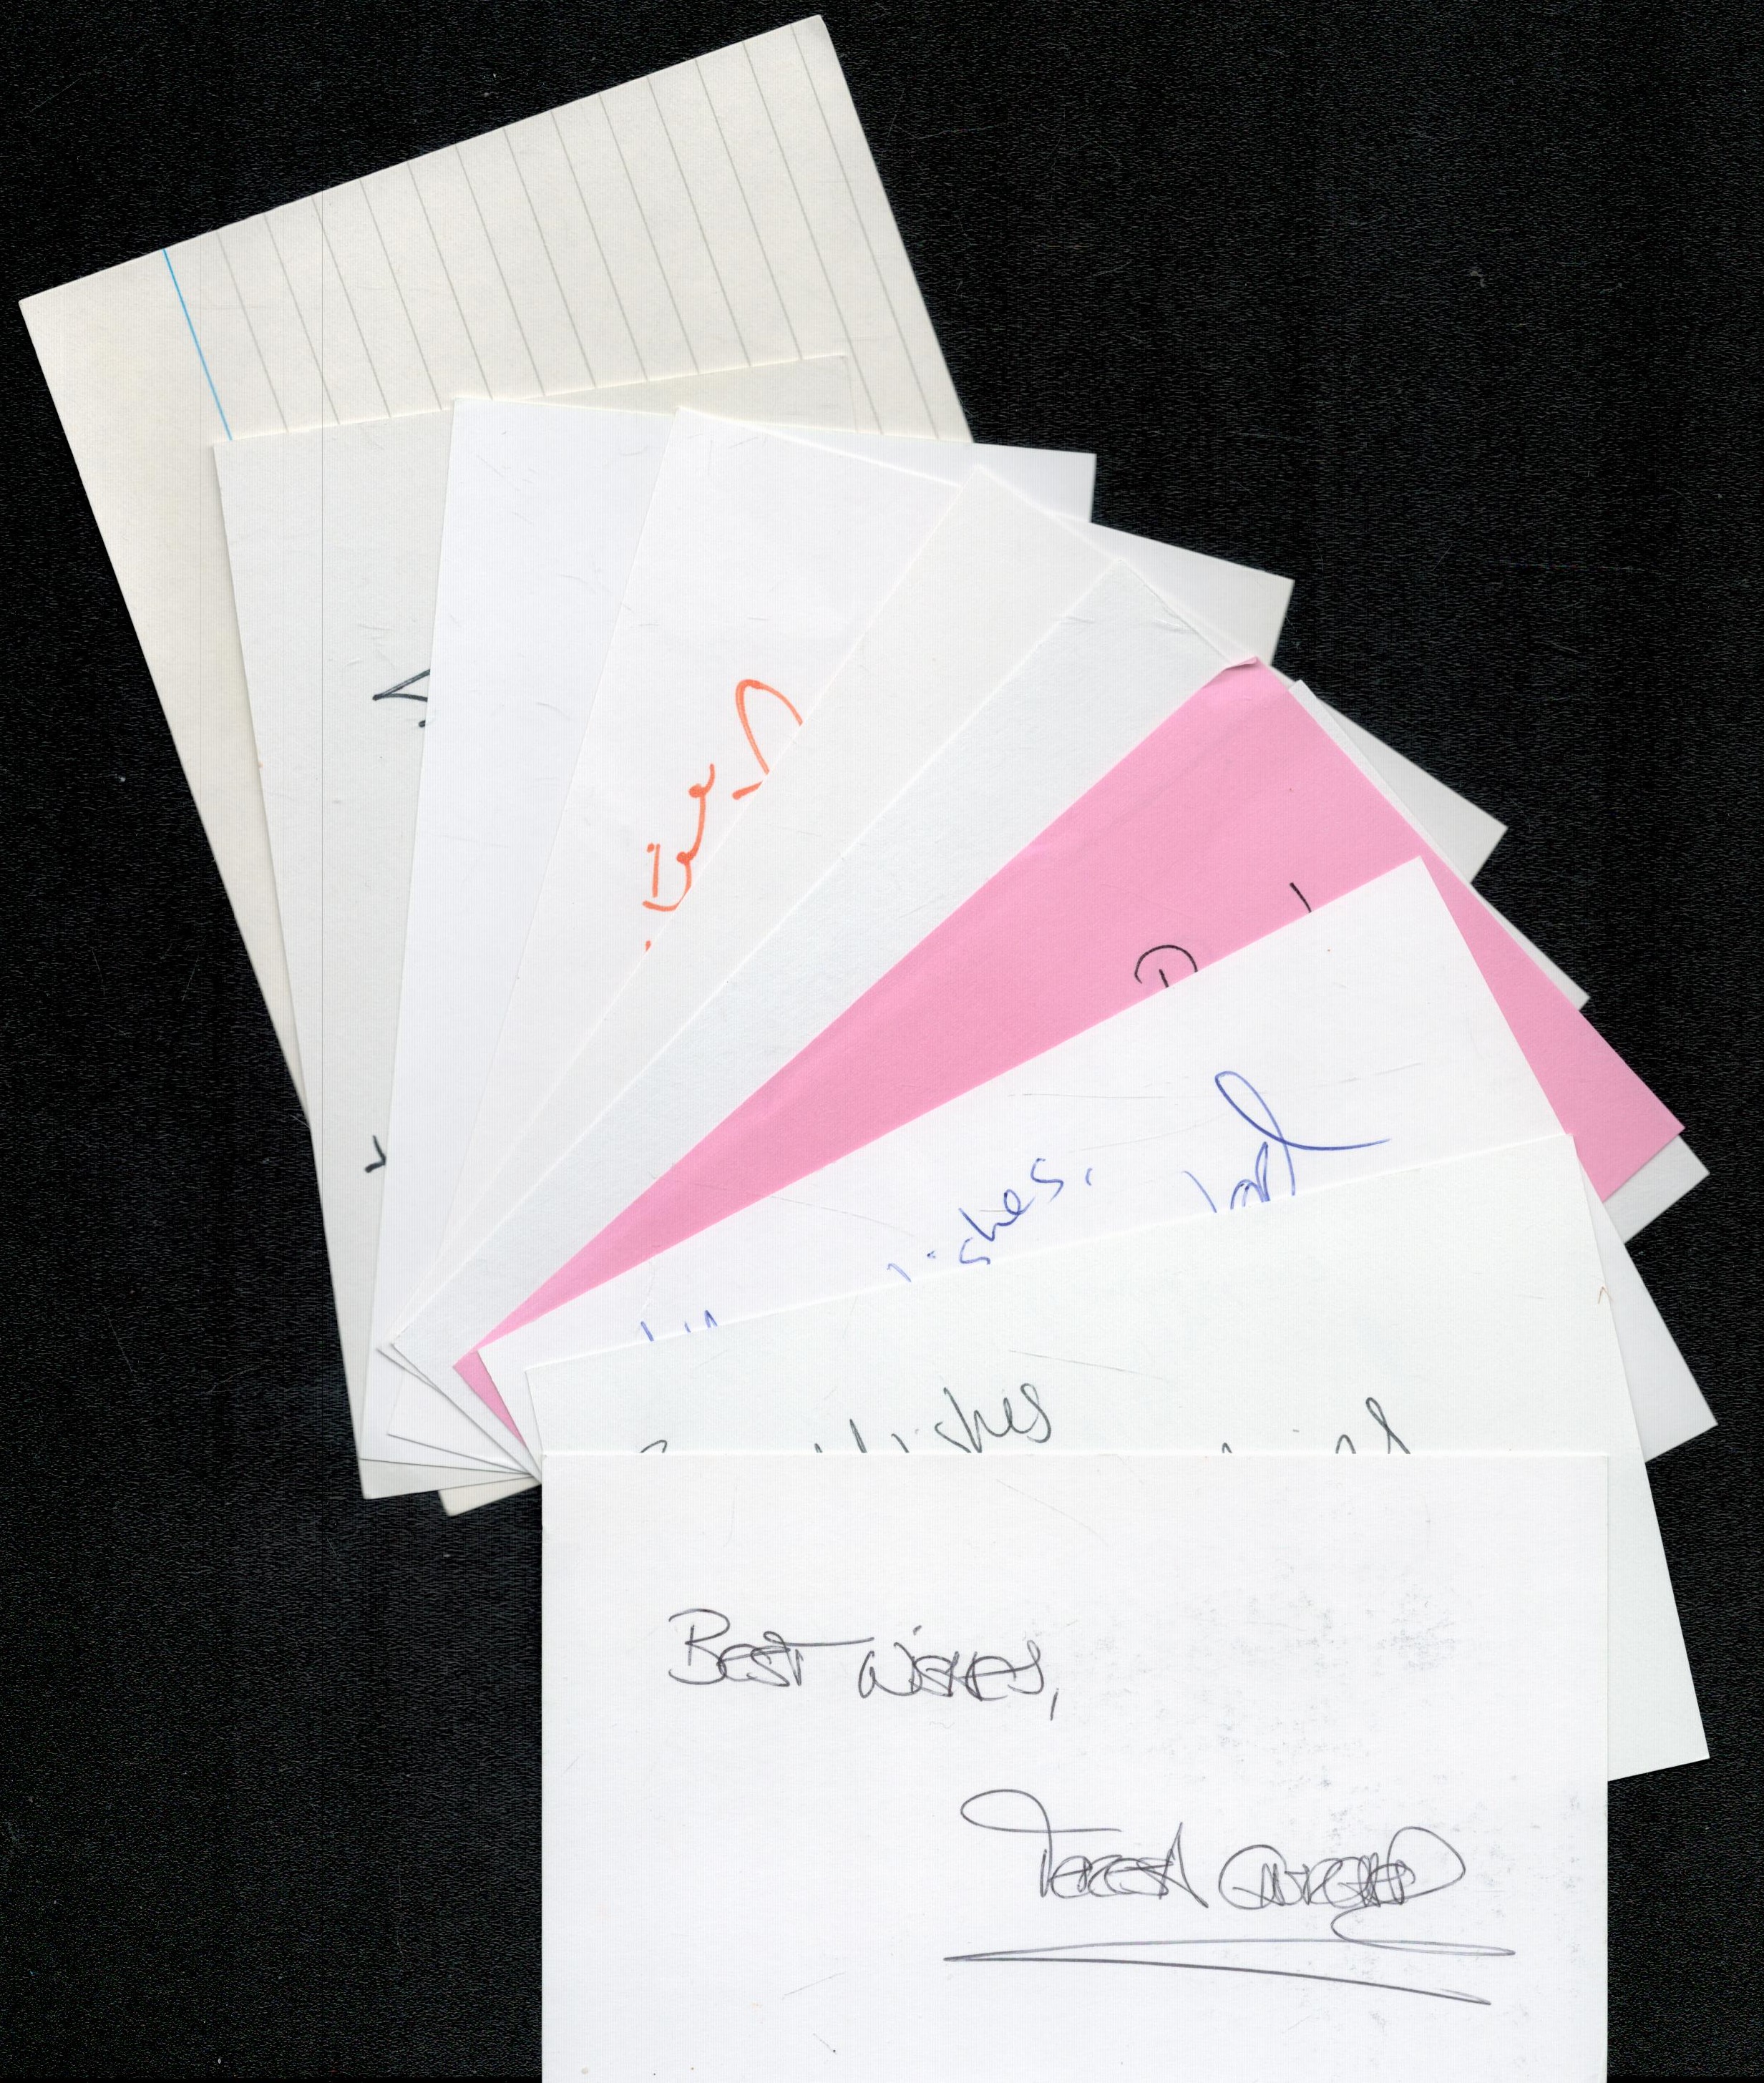 Actresses. 10 x Collection of signed White Cards/Index Card Approx. 5x3 Inch/6x4 Inch. Signatures